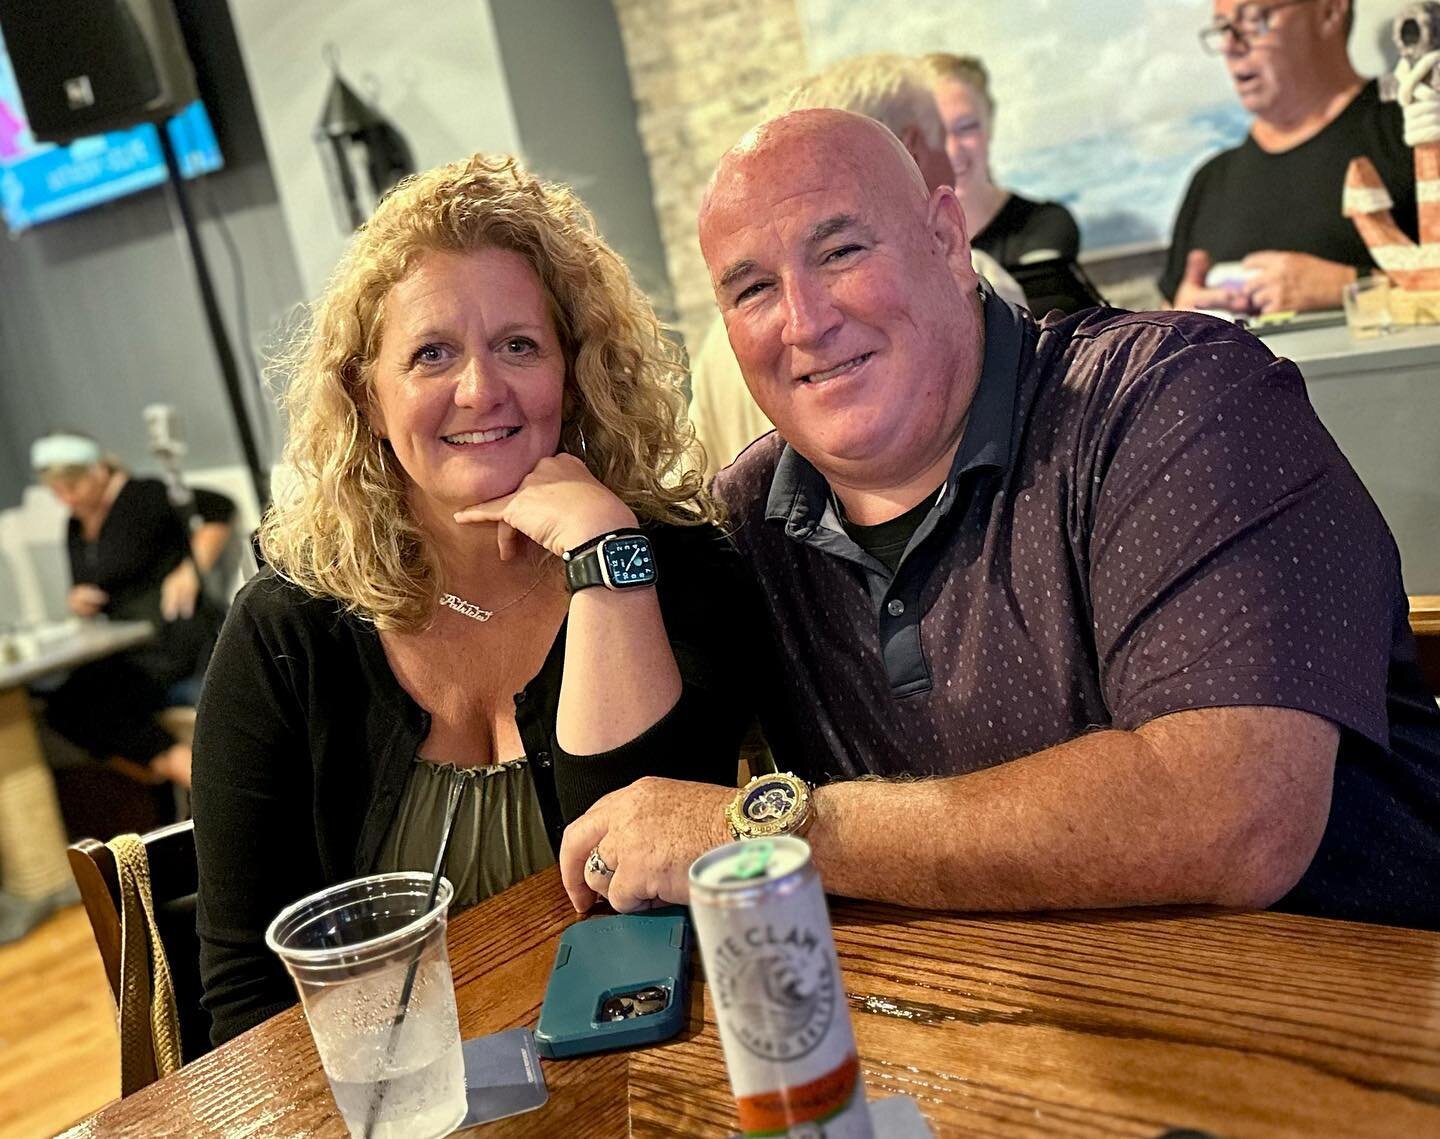 Thank you Patty &amp; Sean for coming in! It was so great catching up with you Patty! 
Mom &amp; Dad DellaRocca are such great supporters of Fins &amp; Forks&hellip;we are very grateful! ☀️
#friends #hamptonbays #summer #eastquogue